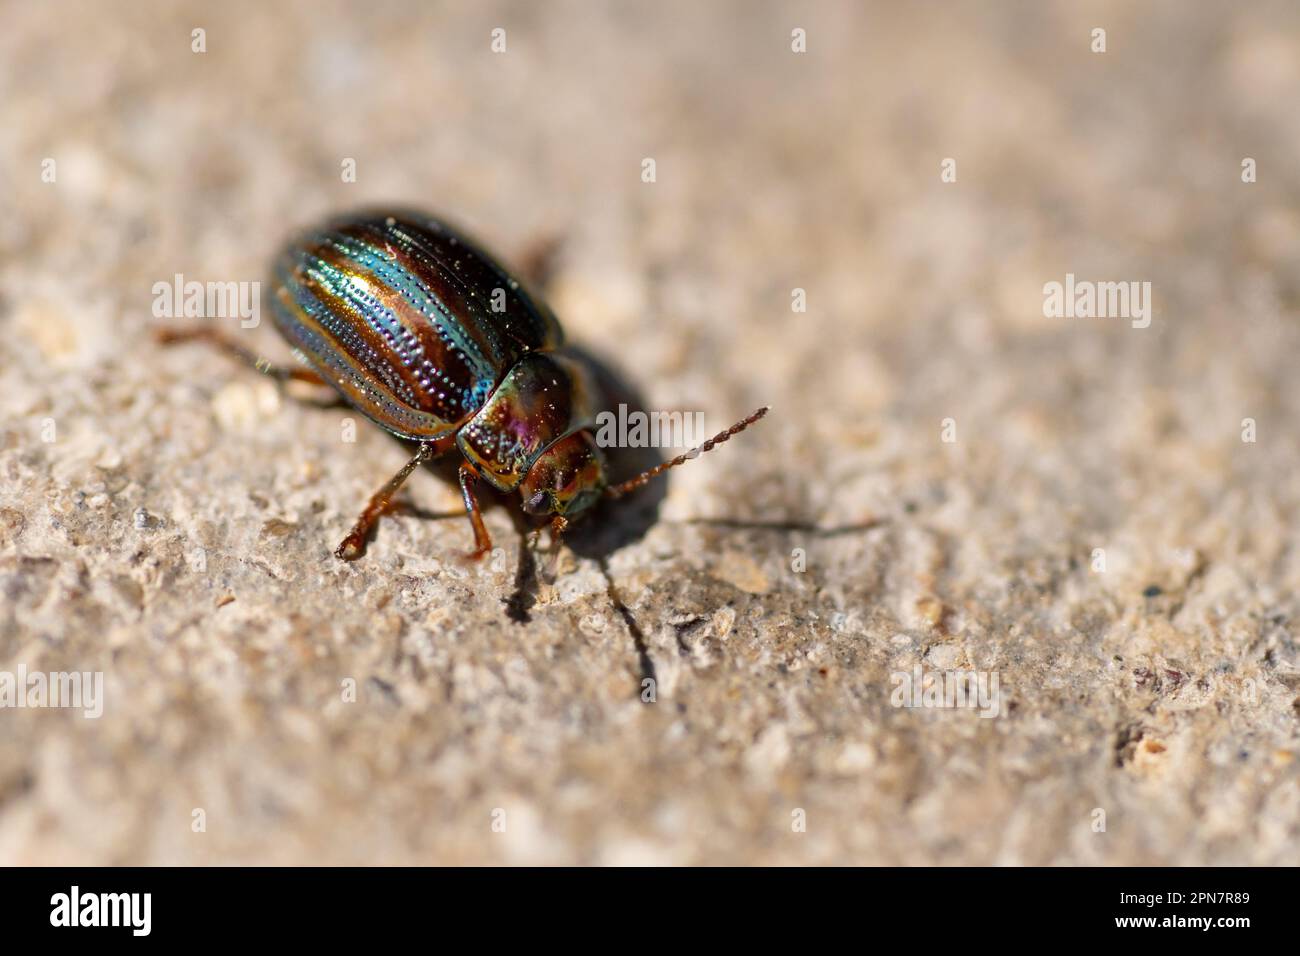 Chrysolina americana insect or rosemary beetle walking sideways to the right on the dirt floor on a bright day Stock Photo